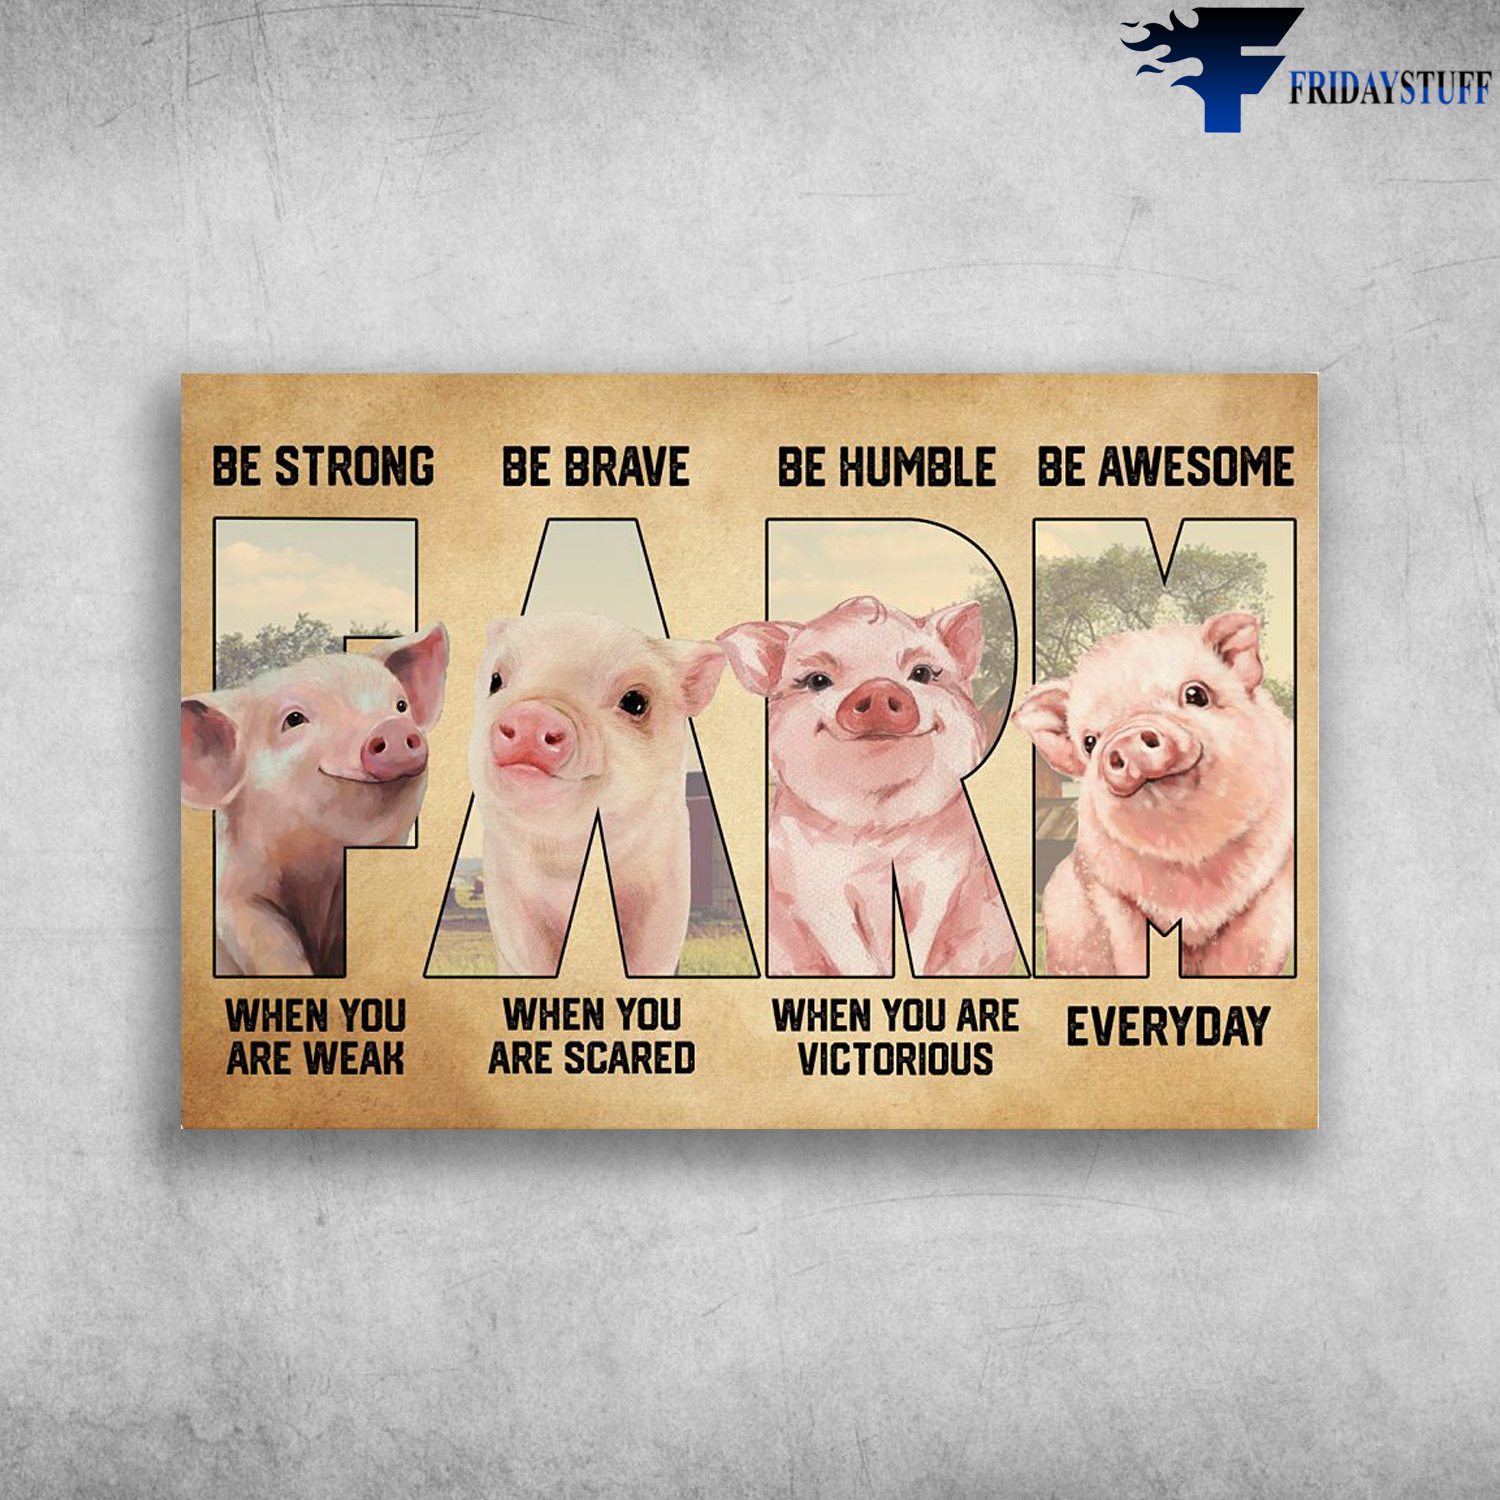 The Pig - Be Strong When You Are Weak, Be Brave When You Are Scared, Be Humble When You Are Victorious, Be Awesome Everyday